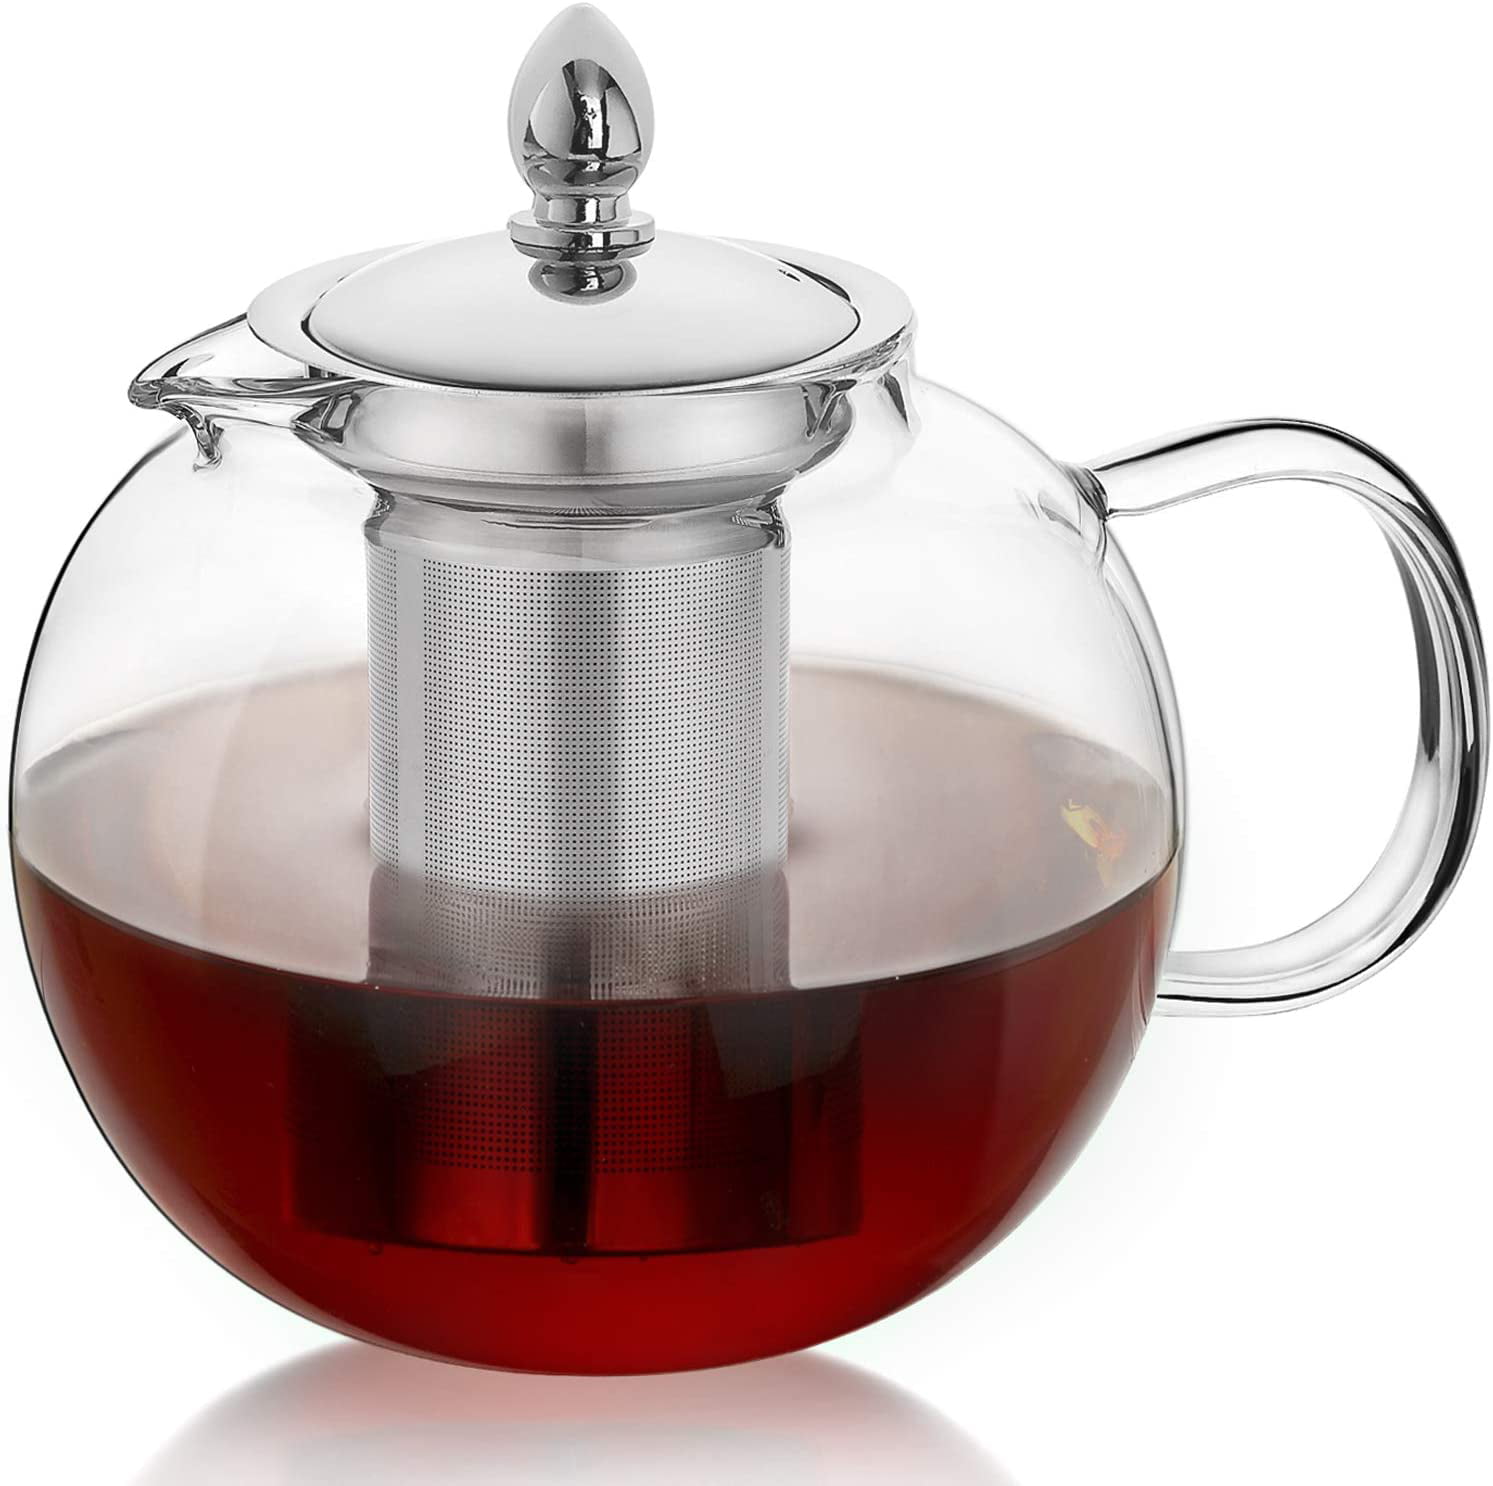 Blooming Tea Fruit Infused Tea 】（960ML） Tea Bags Seninhi Glass Teapot Clear Tea Kettle Pot With Removable 304 Stainless Steel Infuser Strainer Stove Top Safe【for Loose Leaf Tea